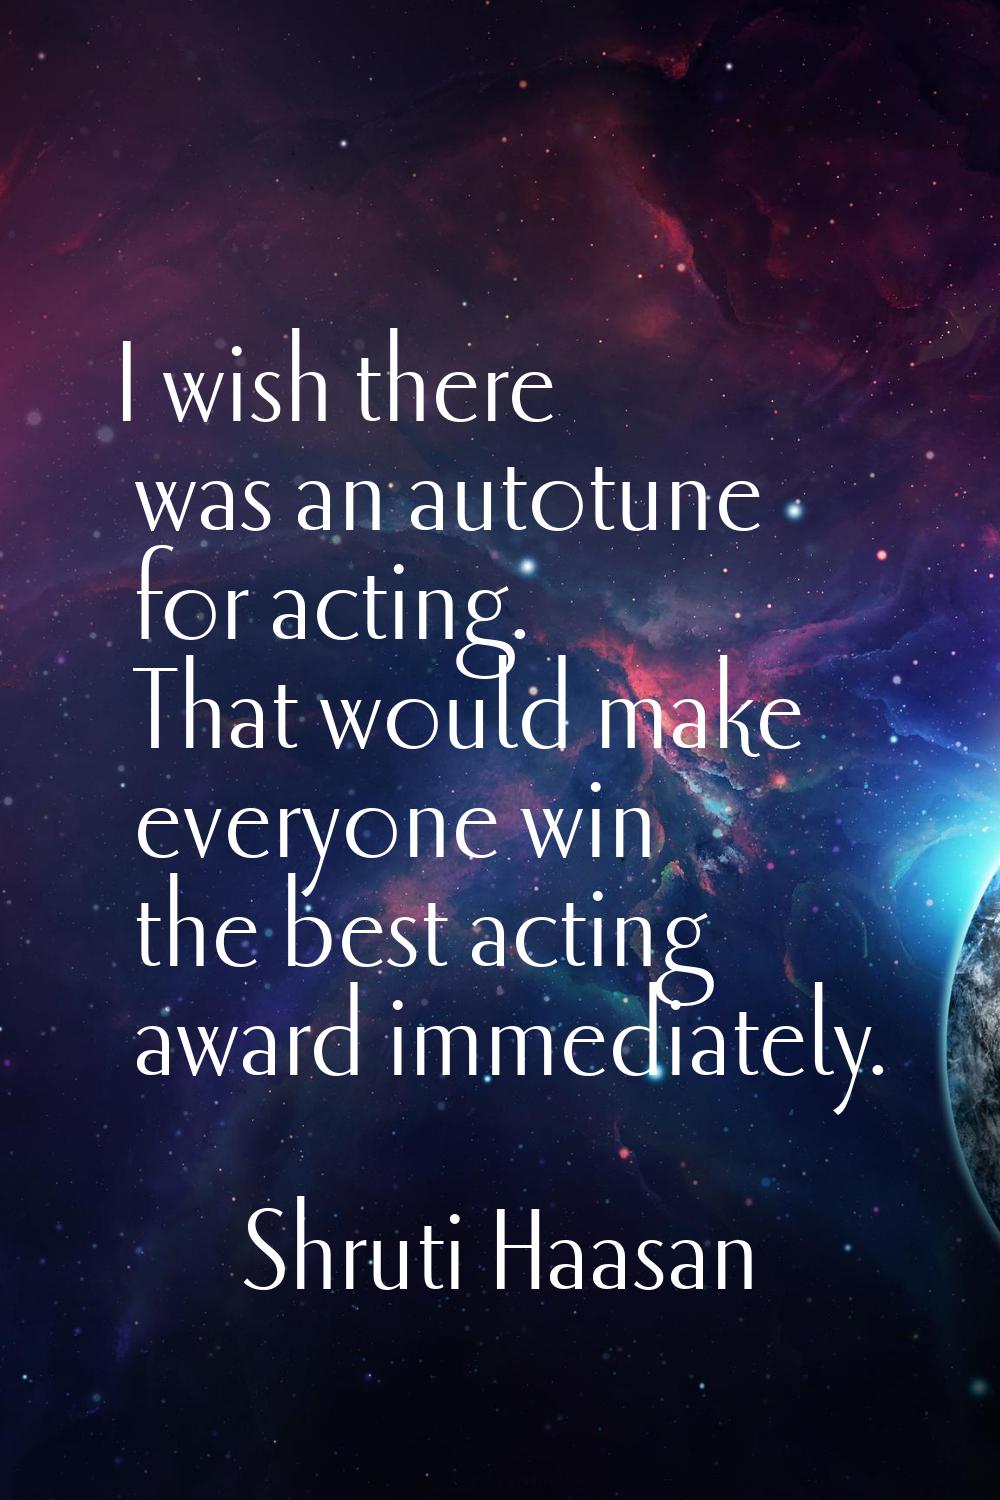 I wish there was an autotune for acting. That would make everyone win the best acting award immedia